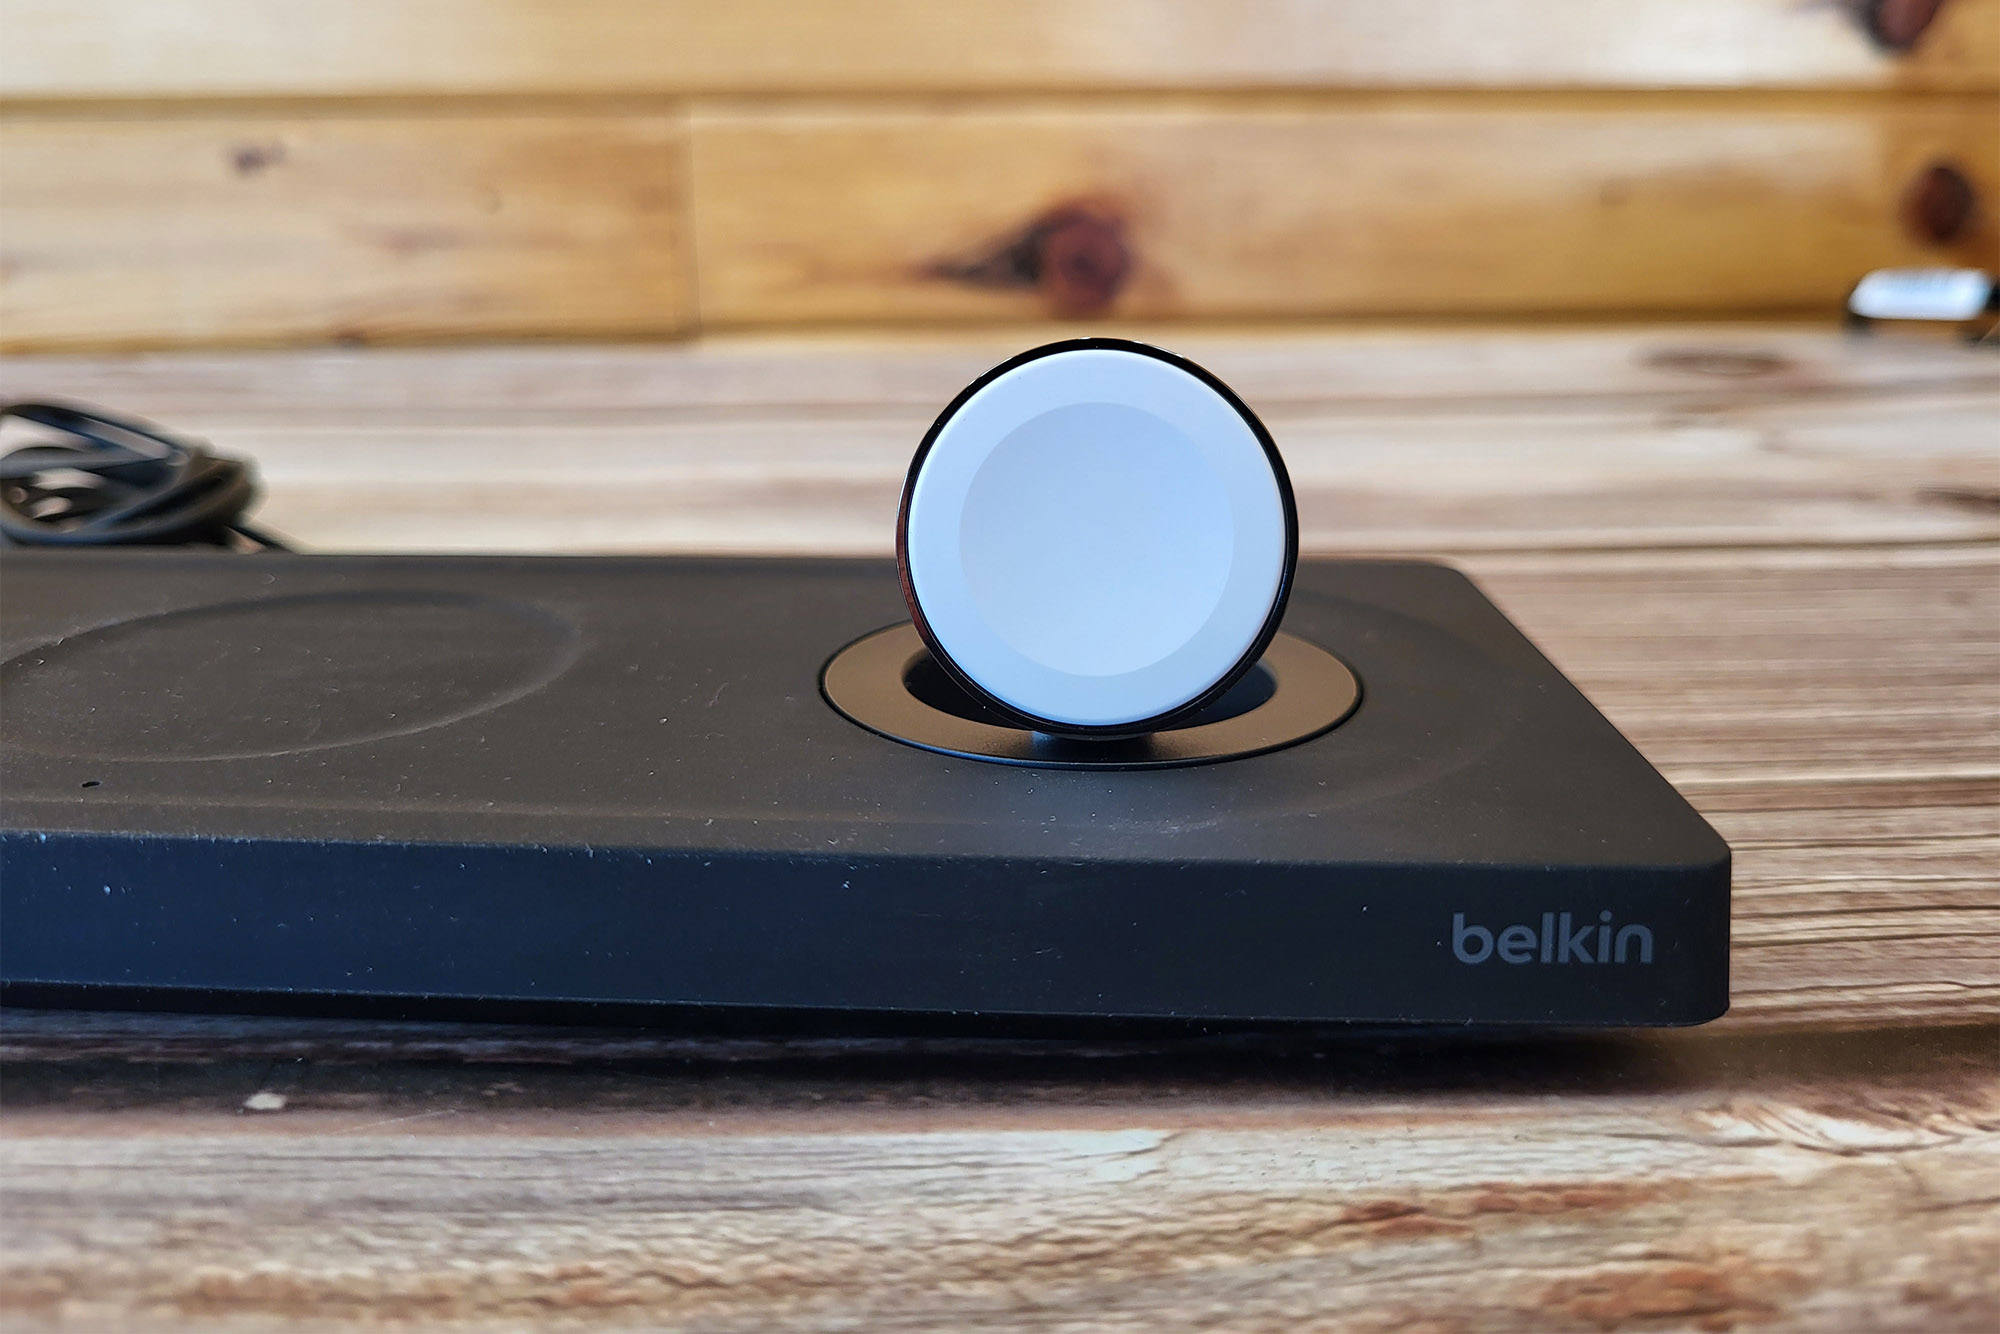 Belkin Boost Charge Pro review: My favorite bedside charger